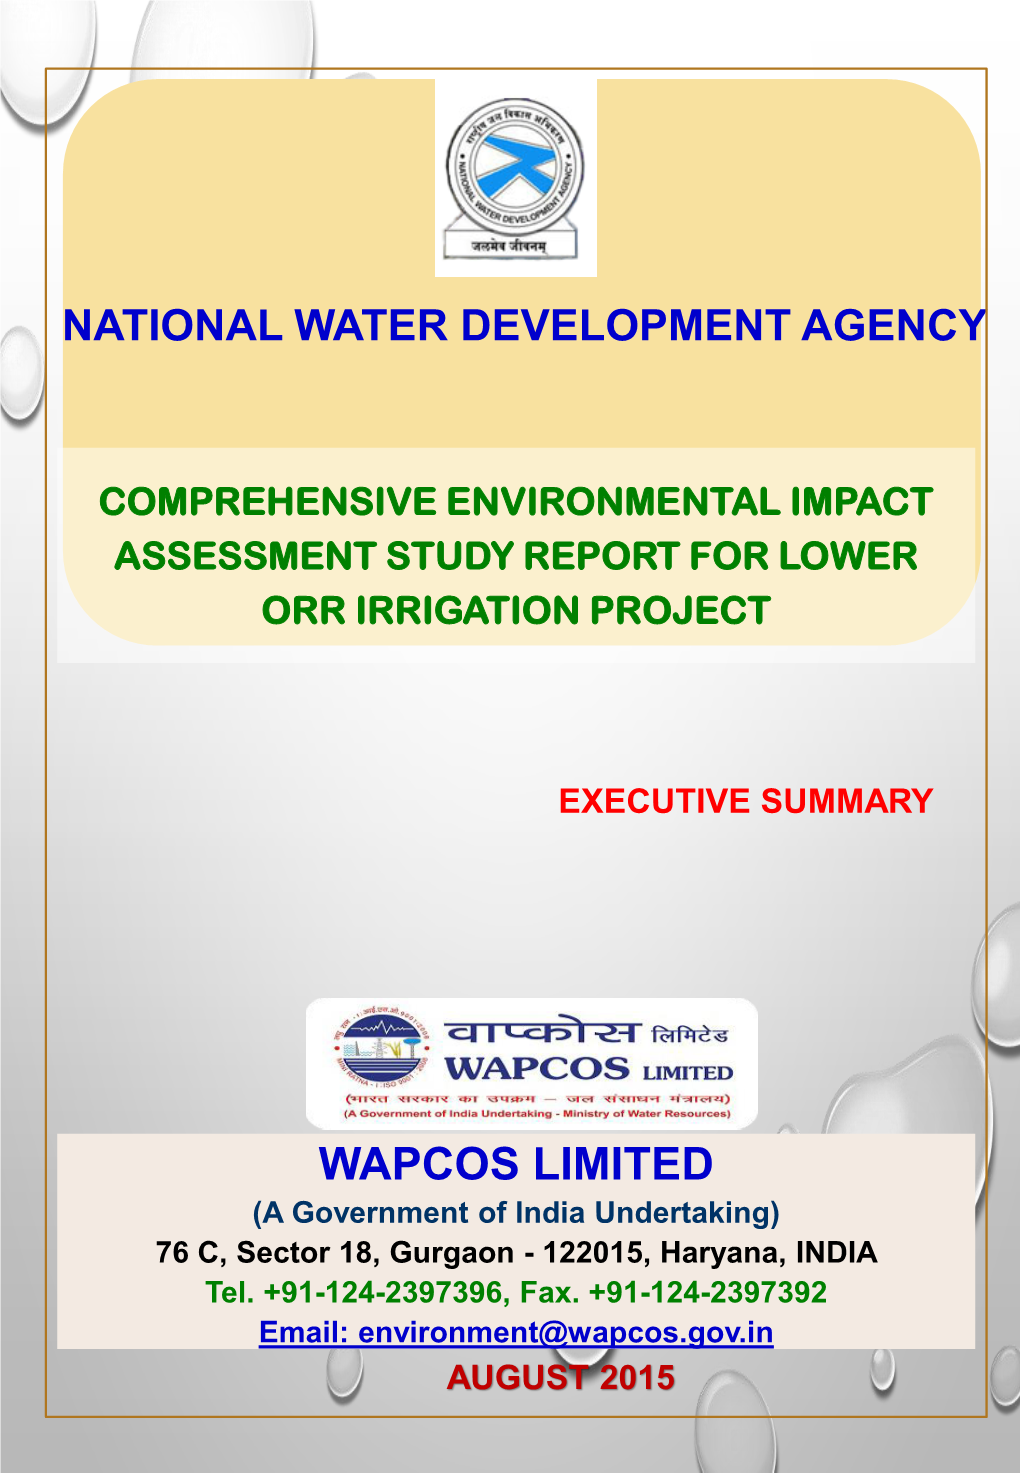 WAPCOS LIMITED (A Government of India Undertaking) 76 C, Sector 18, Gurgaon - 122015, Haryana, INDIA Tel